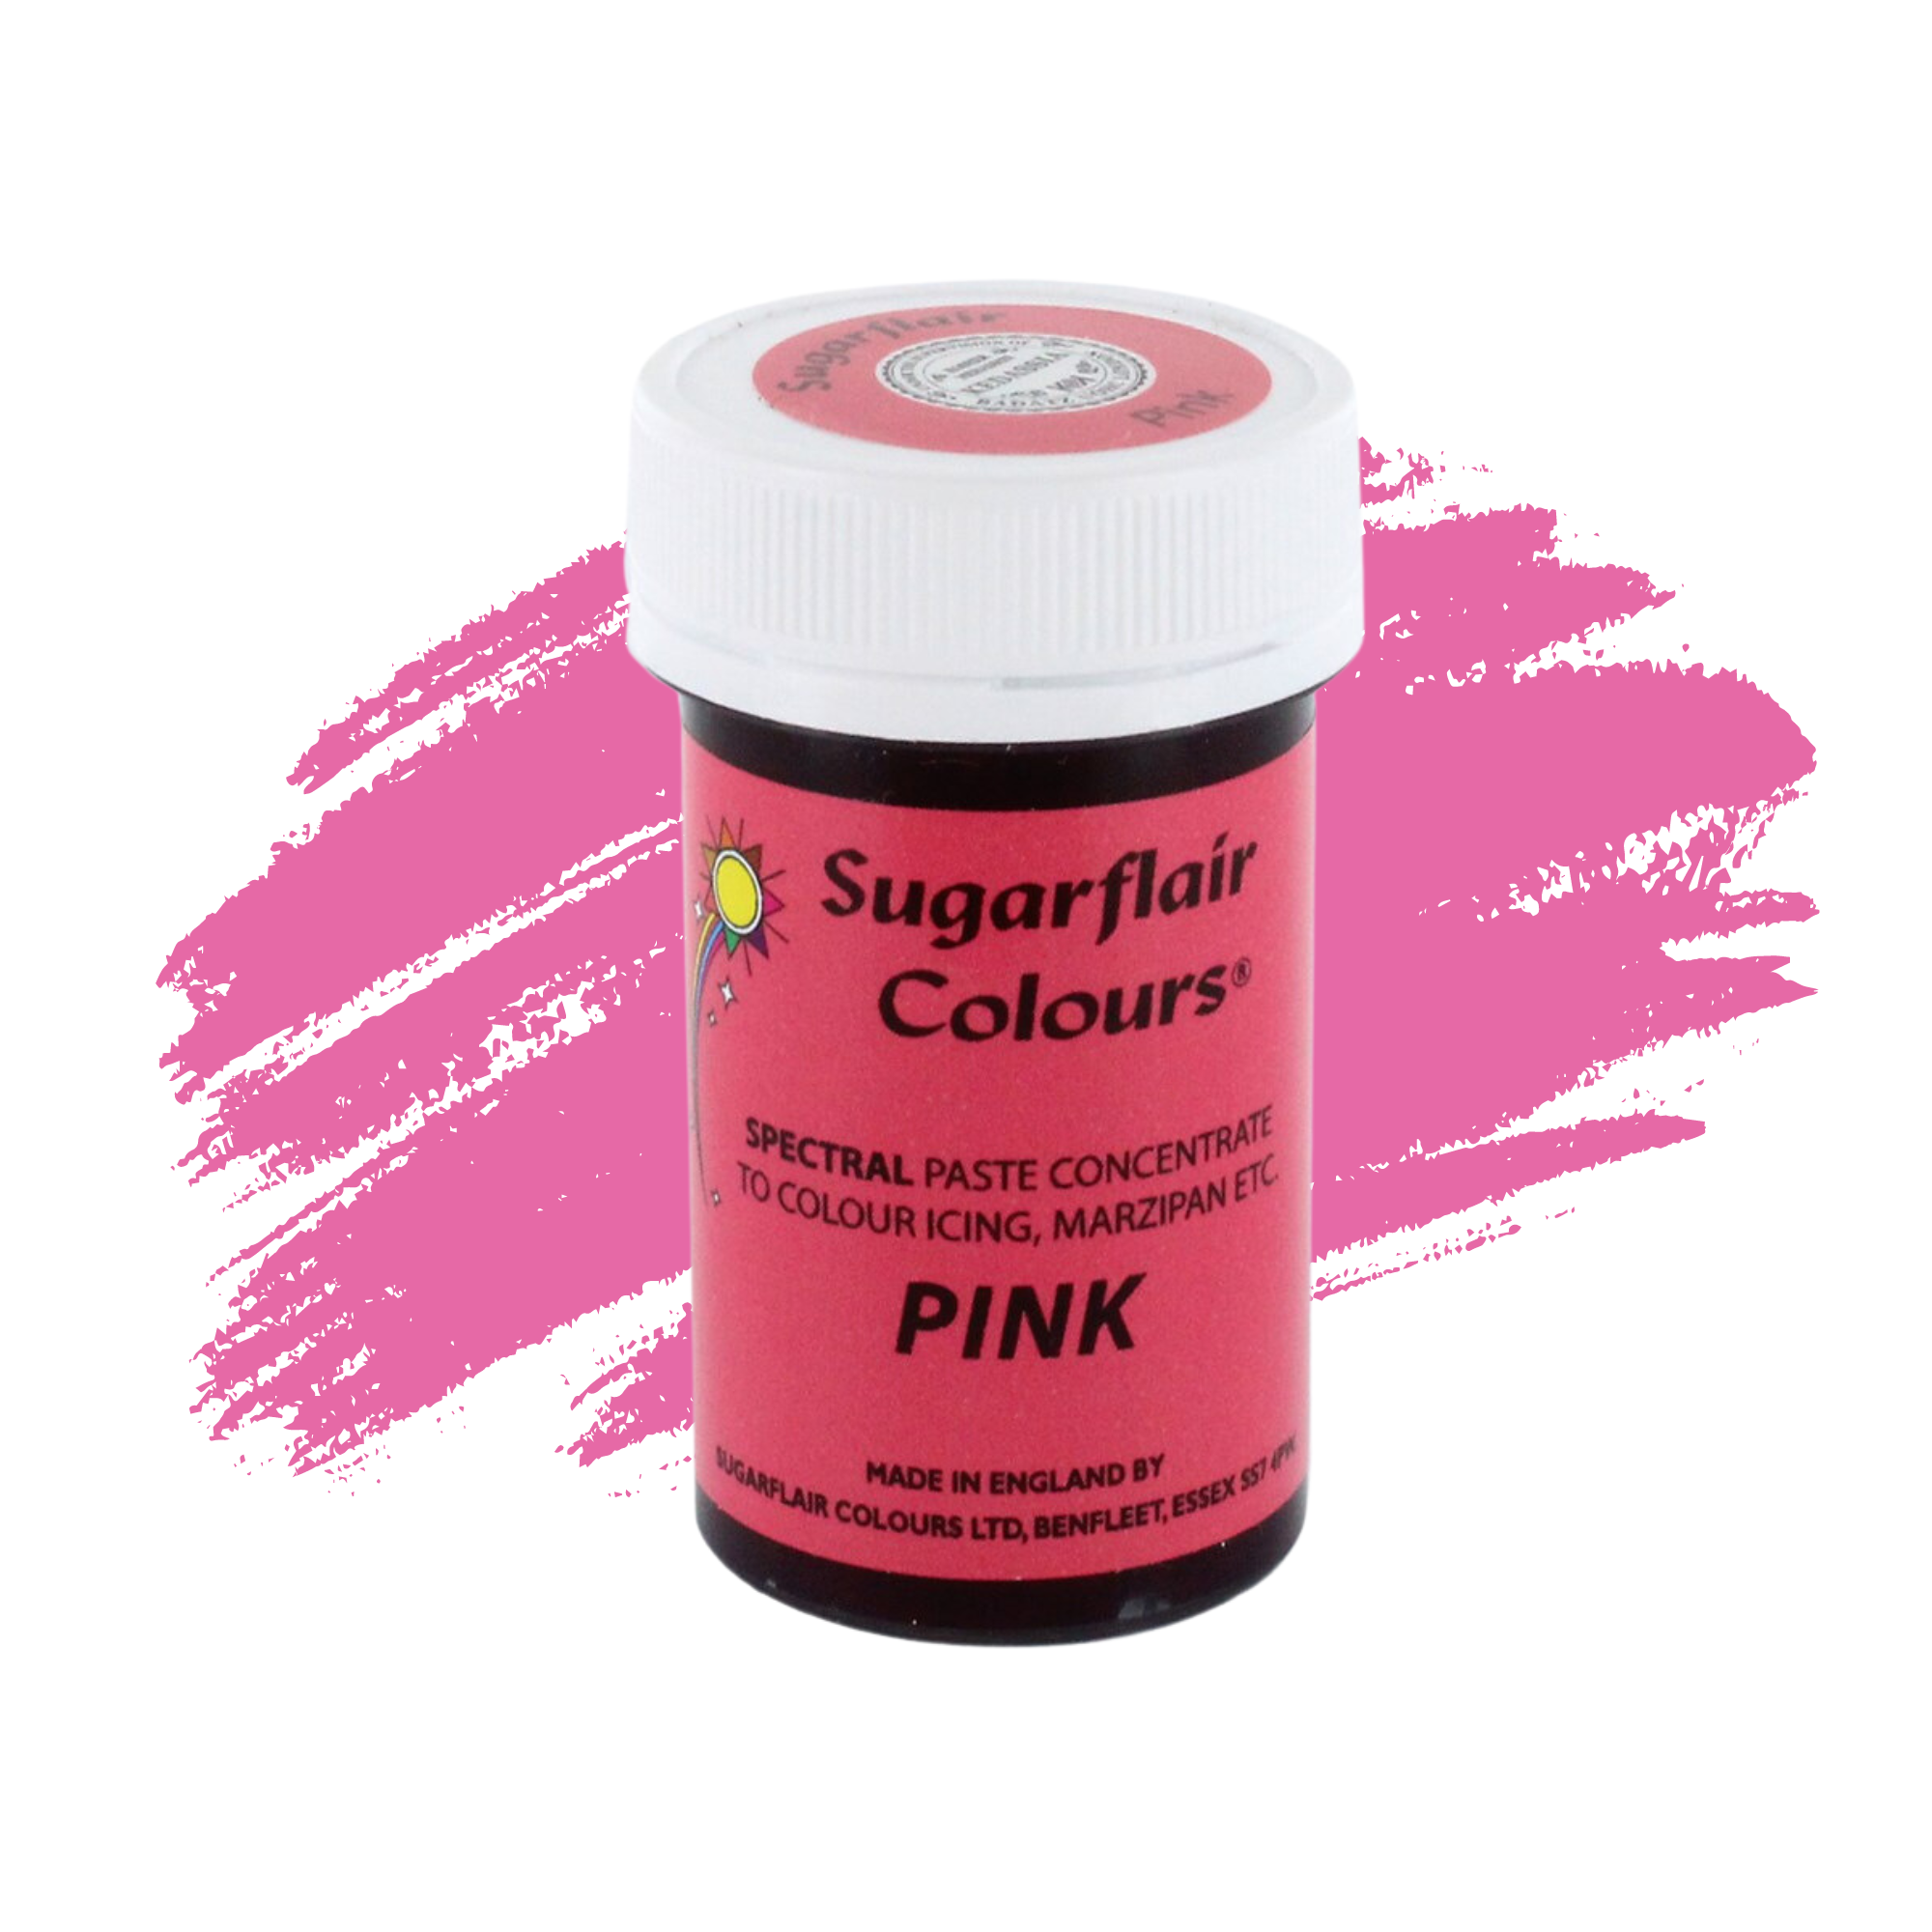 Sugarflair Paste Colours Concentrated Food Colouring - Spectral Pink - 25g